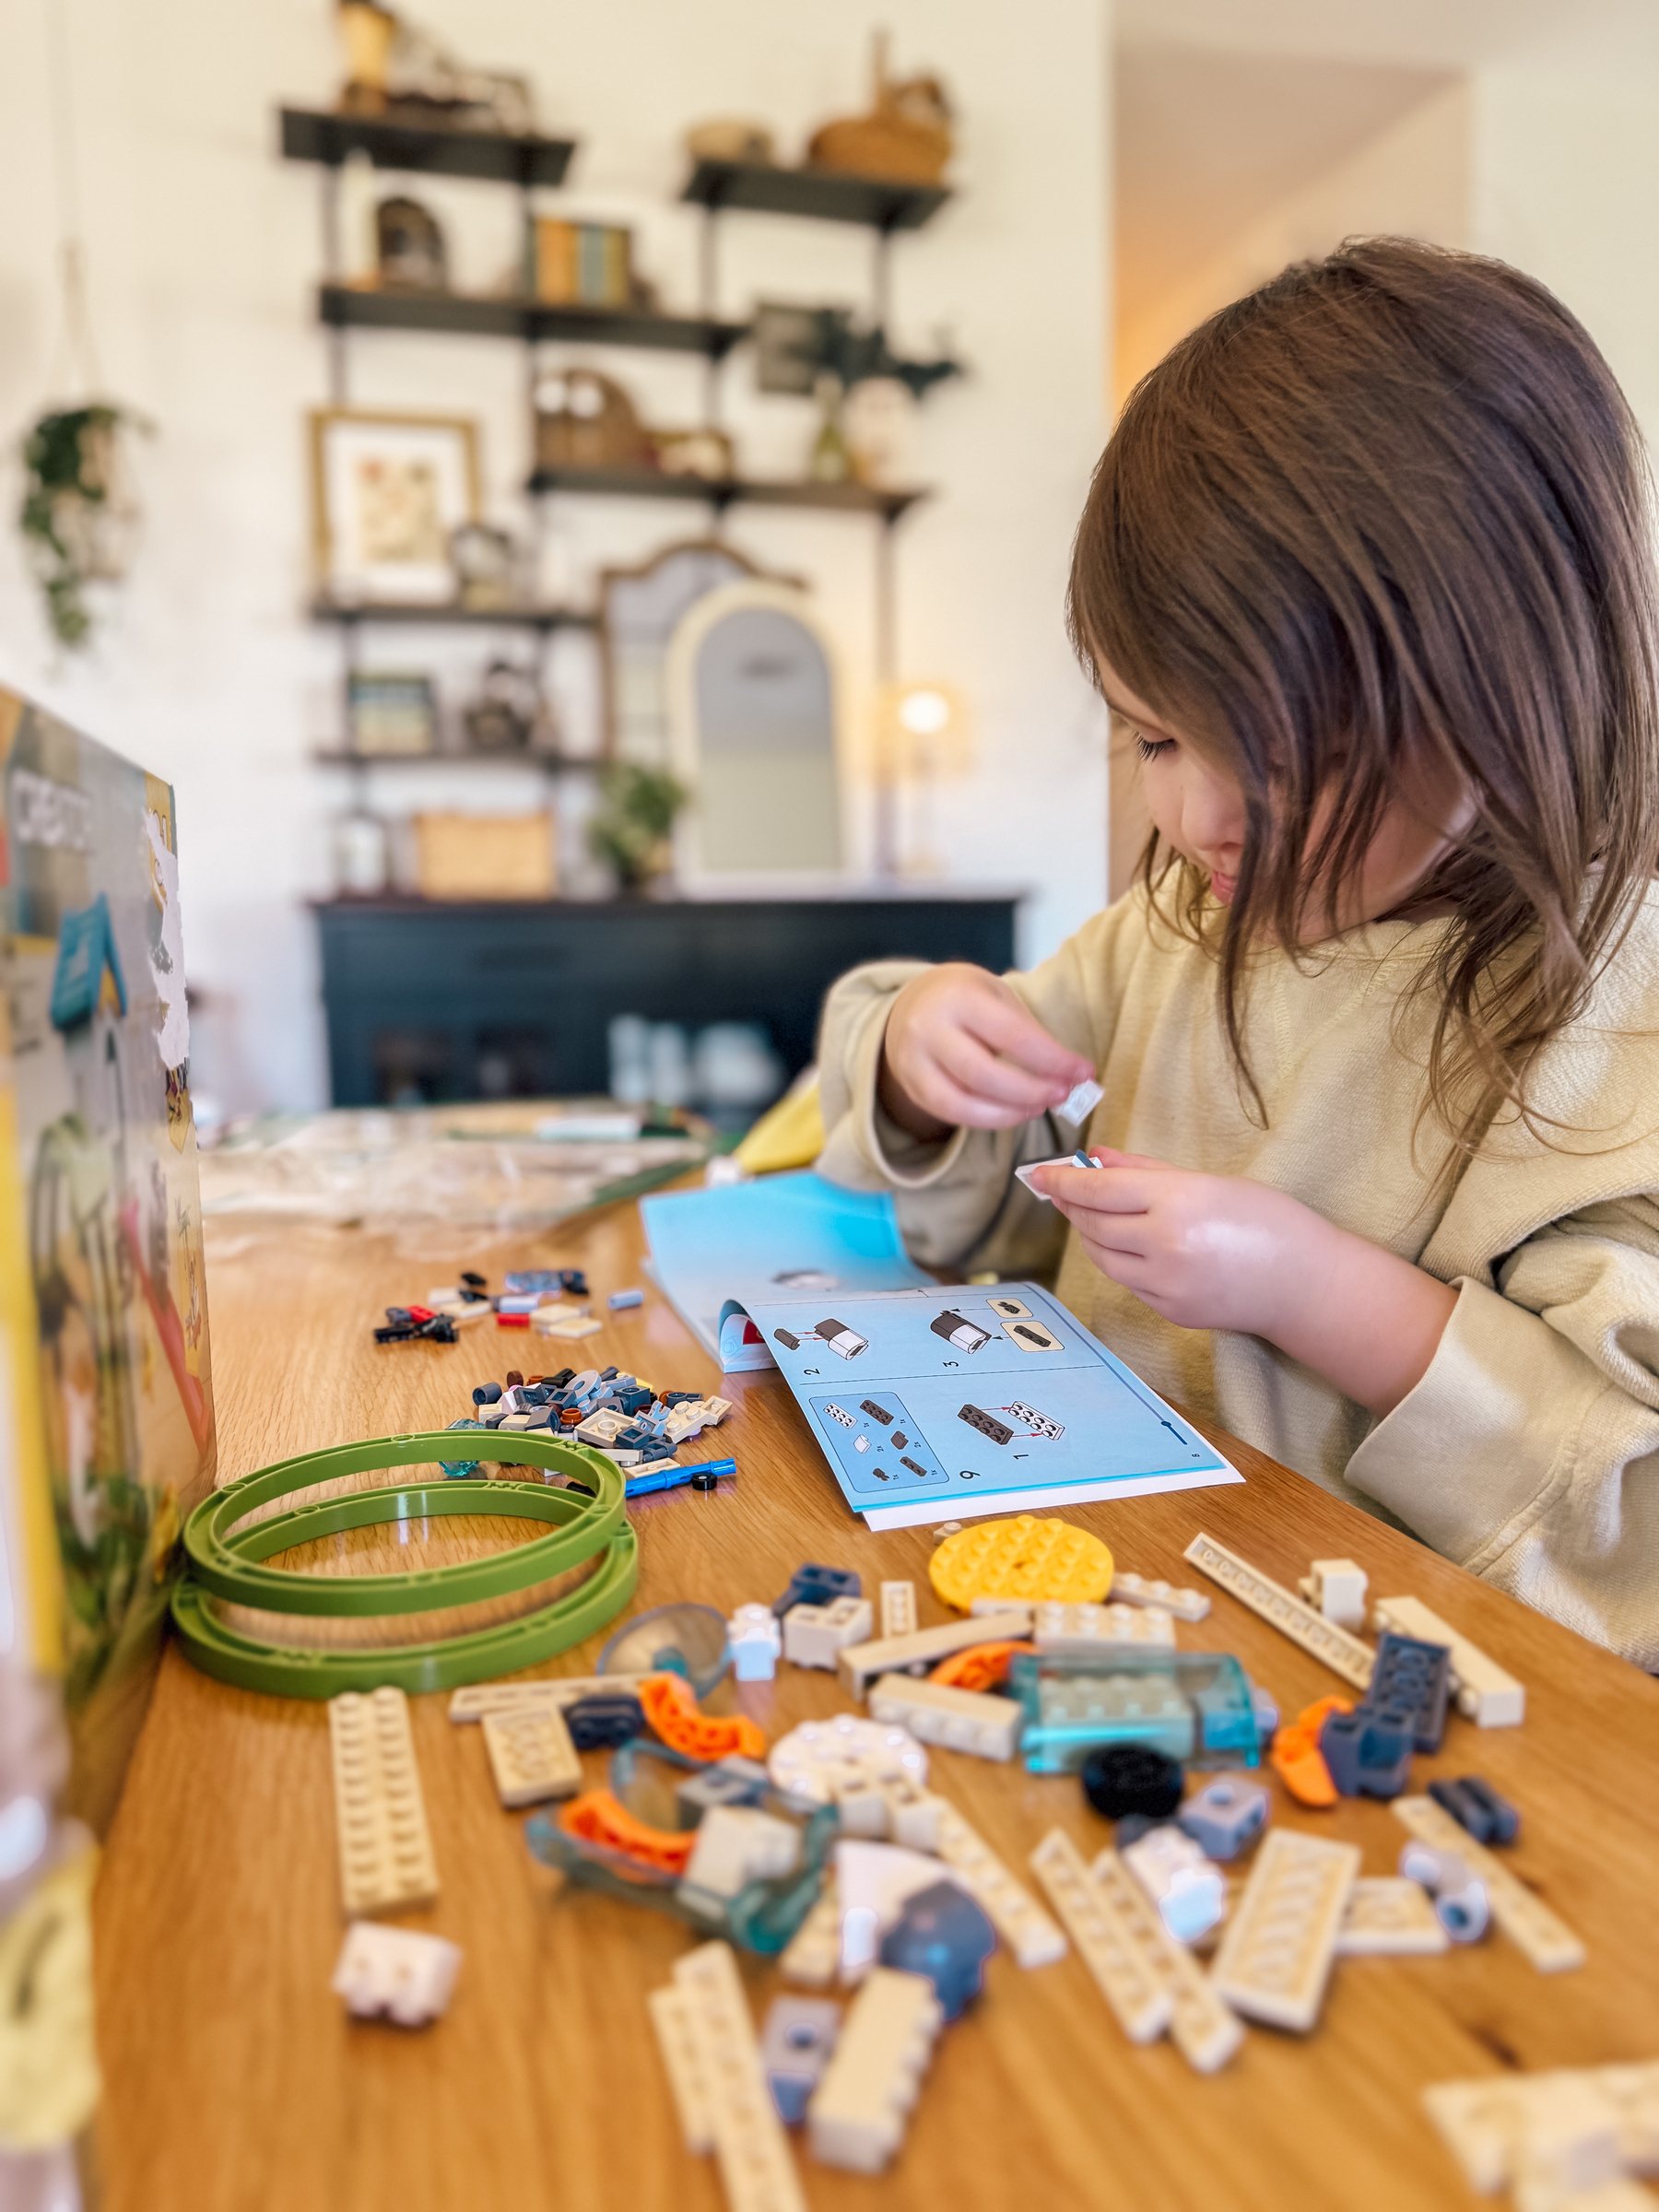 4-year-old girl putting together a Lego set